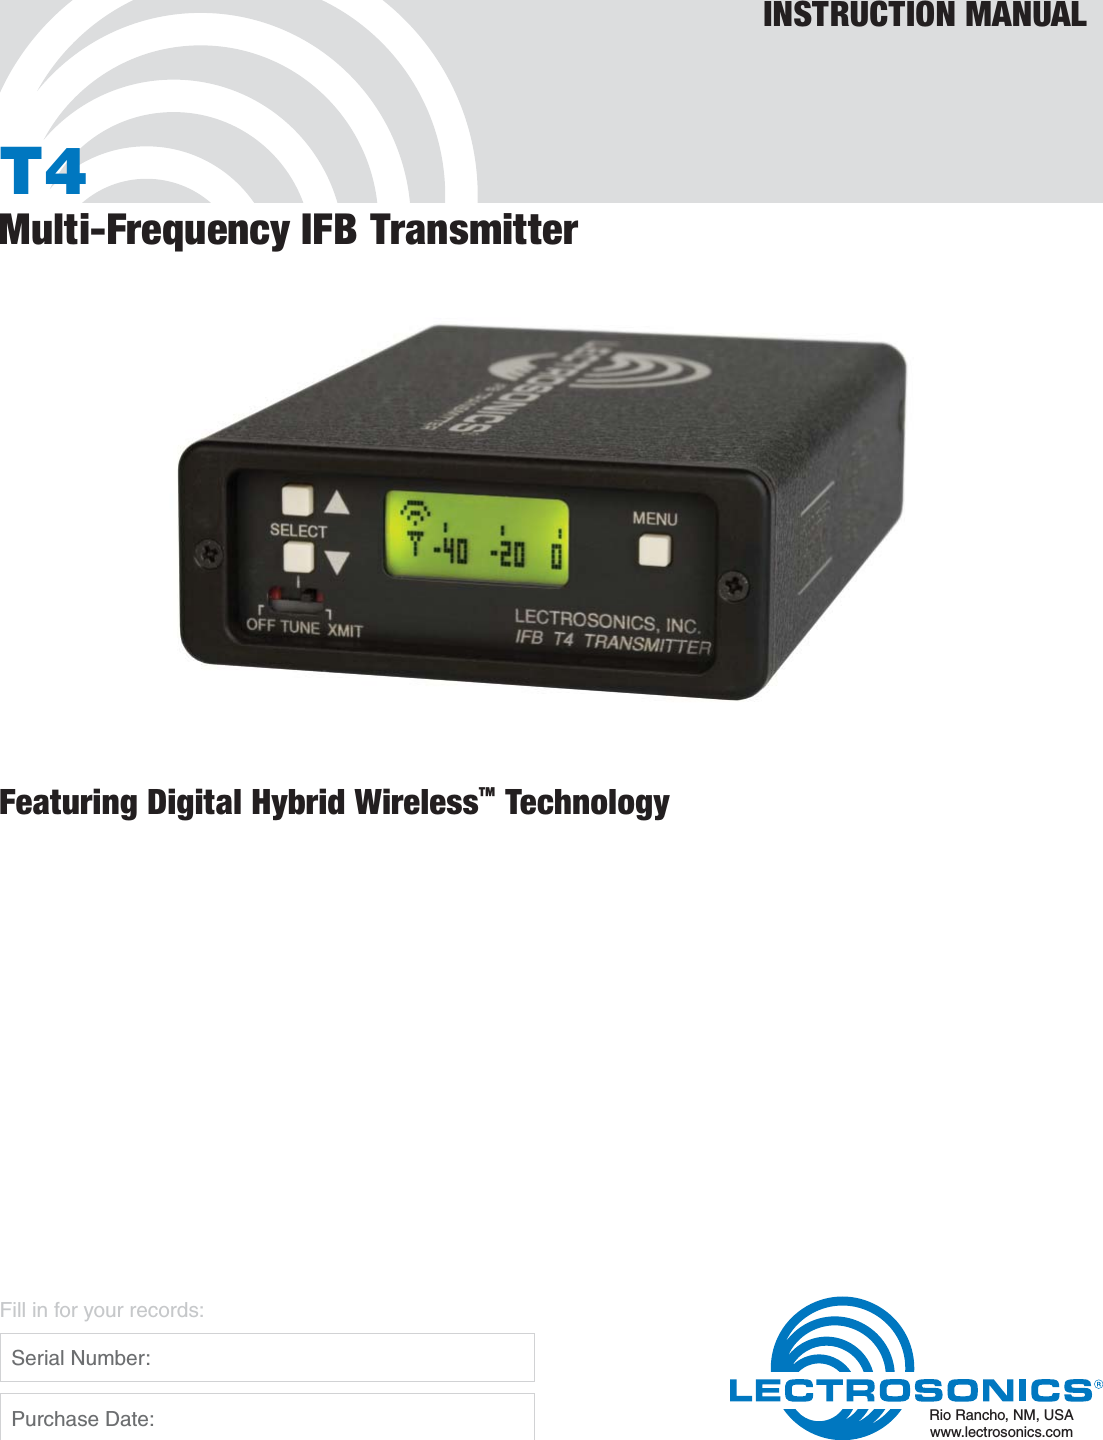 T4Multi-Frequency IFB TransmitterINSTRUCTION MANUALRio Rancho, NM, USAwww.lectrosonics.comFill in for your records:  Serial Number:  Purchase Date:Featuring Digital Hybrid Wireless™ Technology